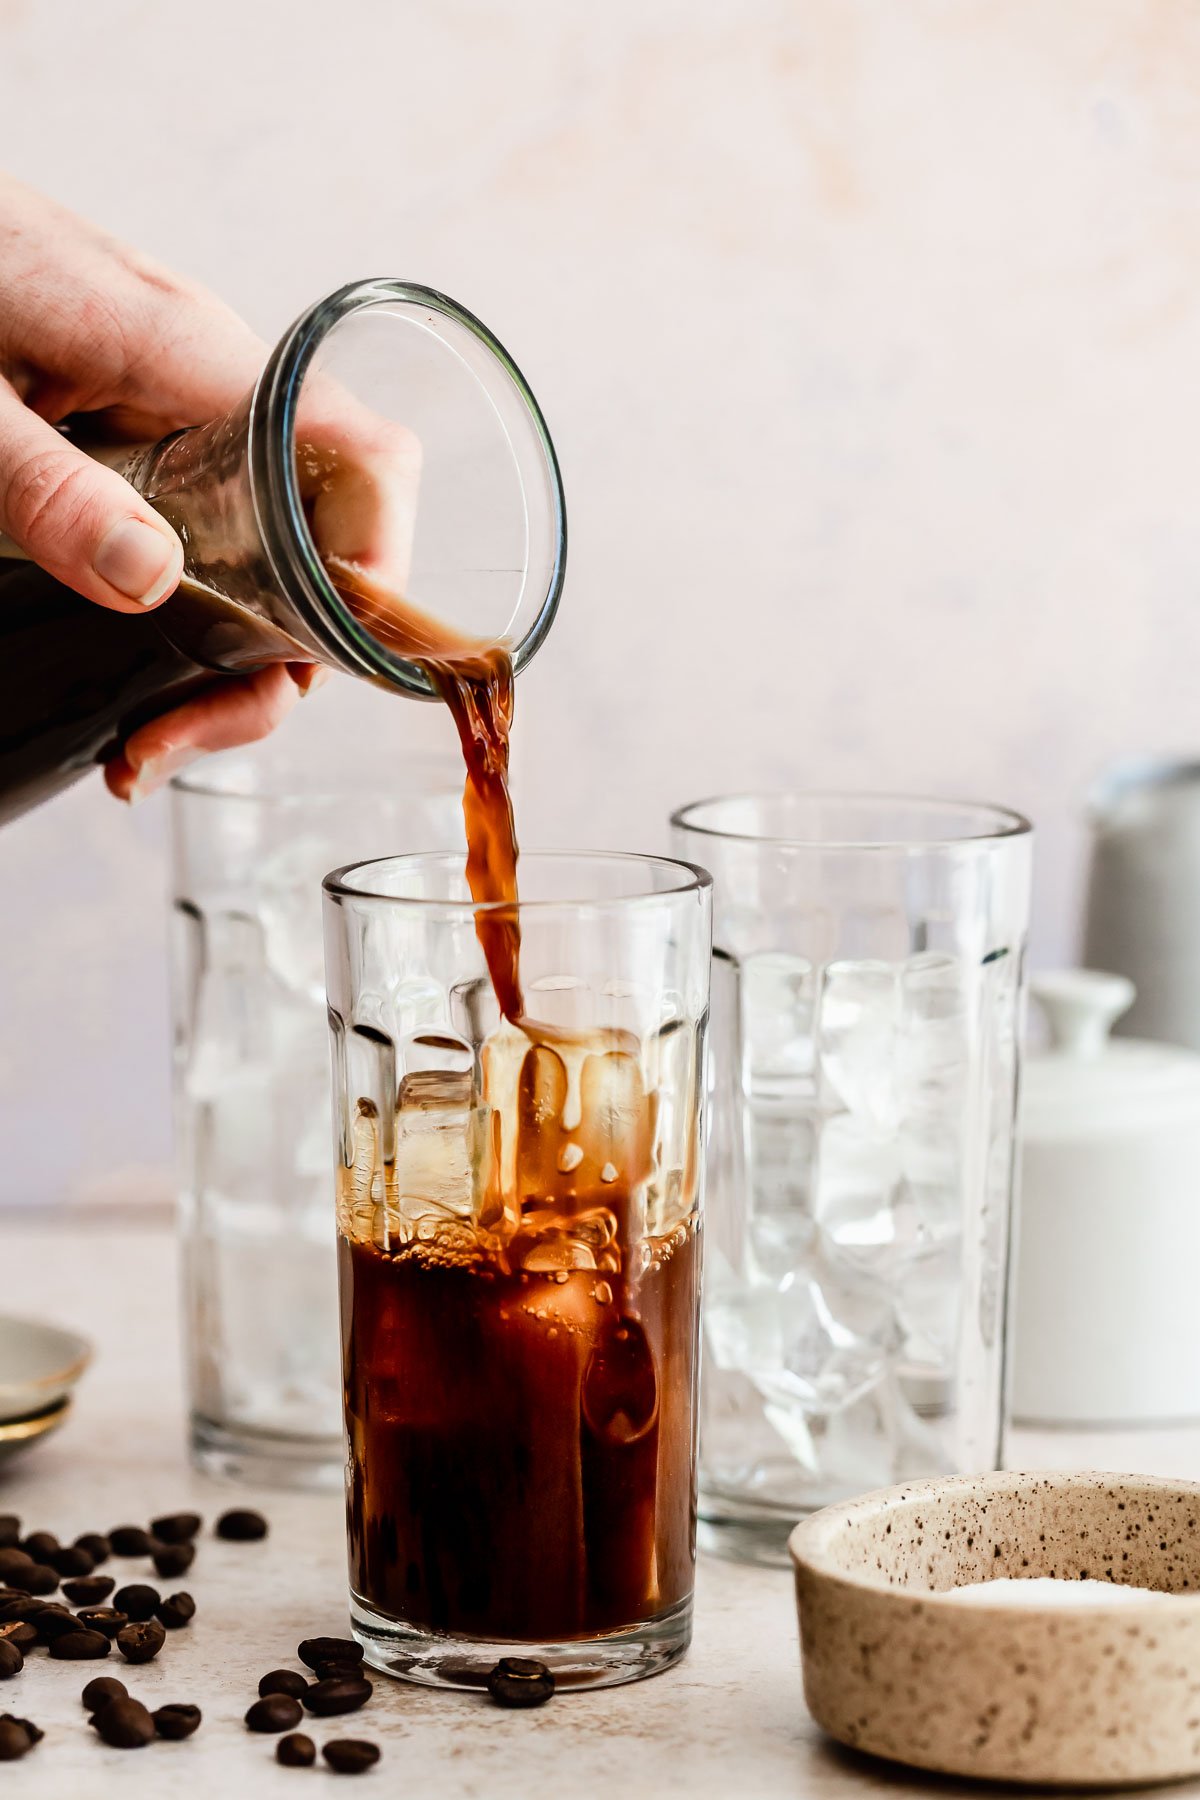 Coffee pouring into glasses.